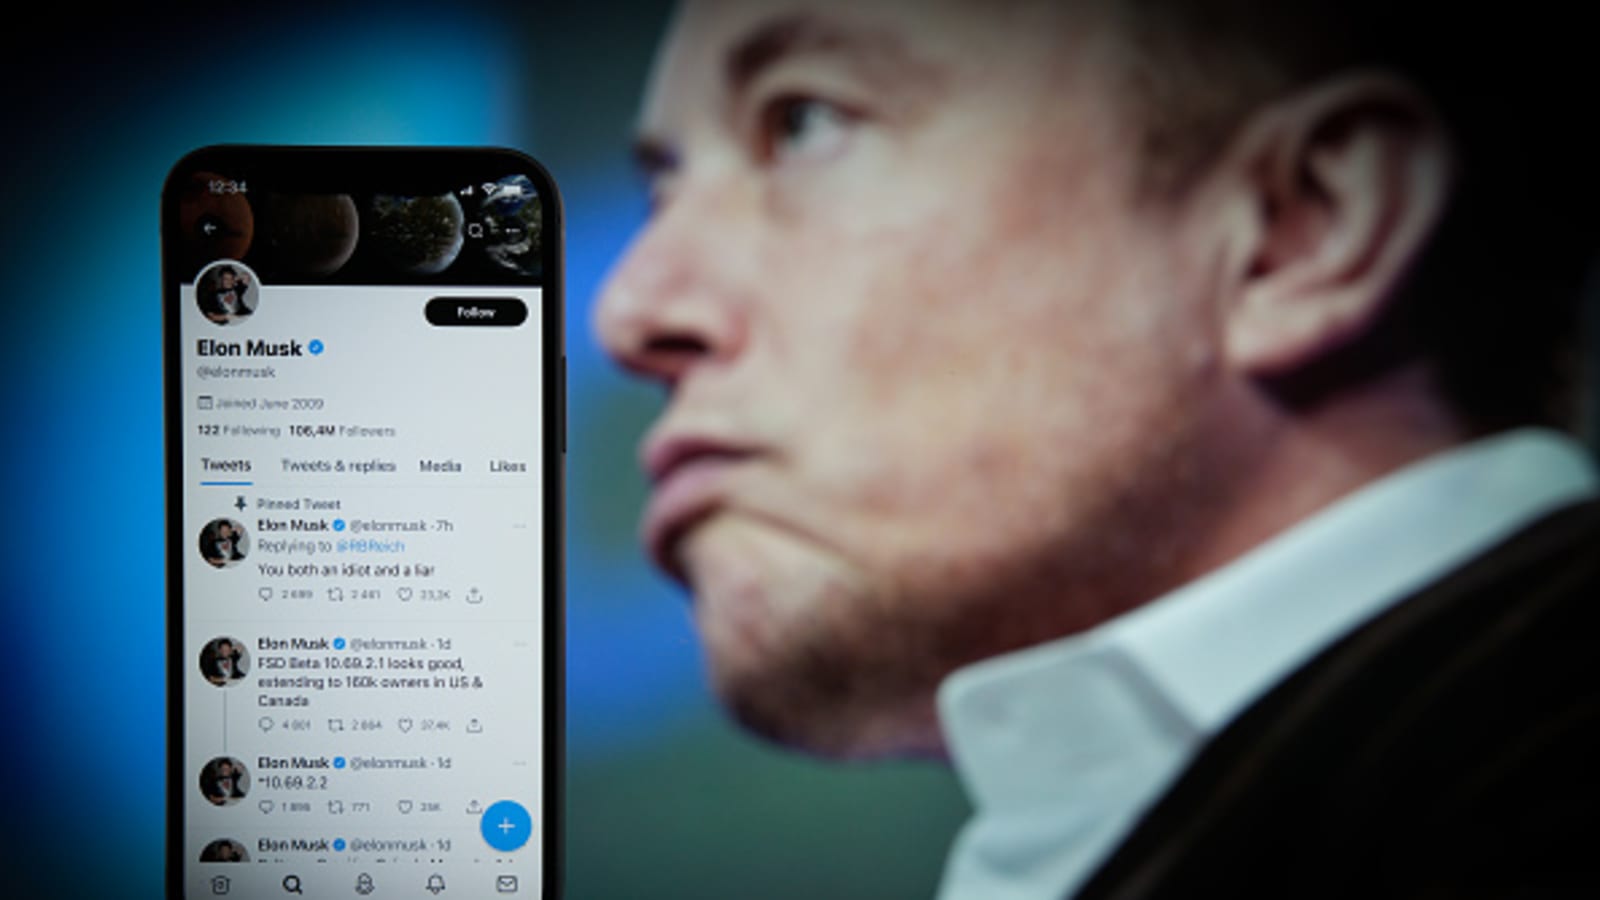 Elon Musk has pulled more than 50 Tesla employees into Twitter